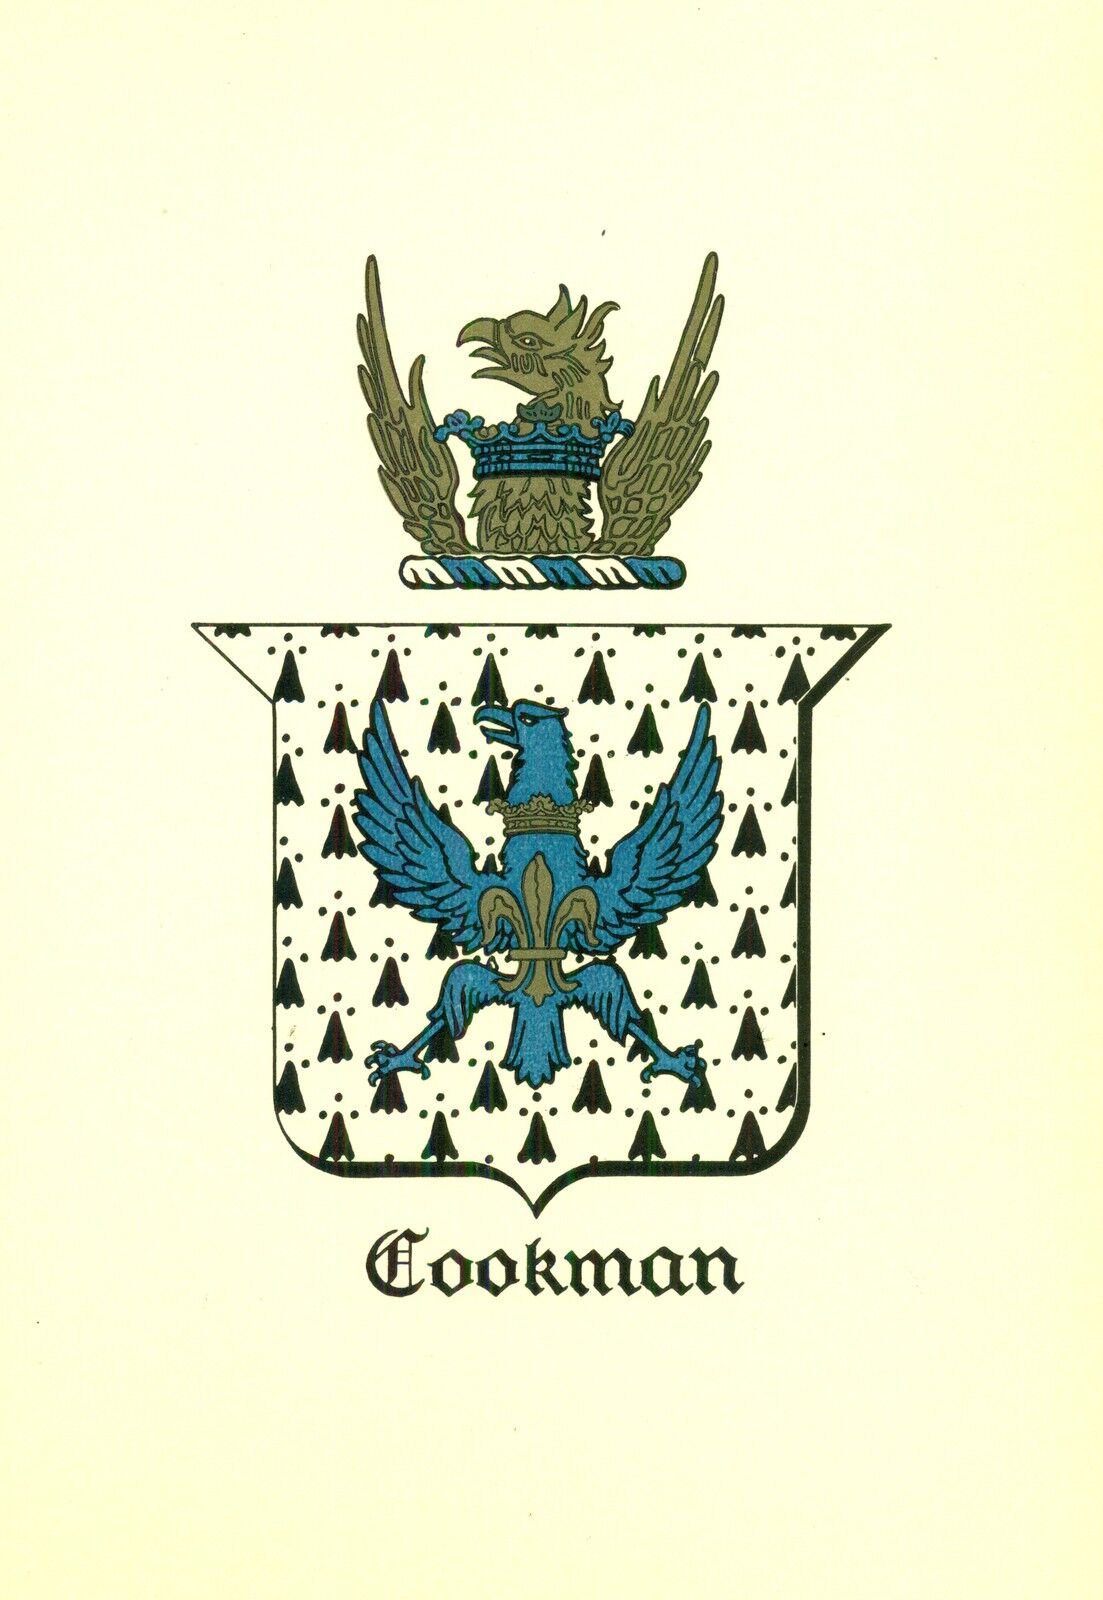 Great Coat Of Arms Cookman Family Crest Genealogy, Would Look Great Framed!